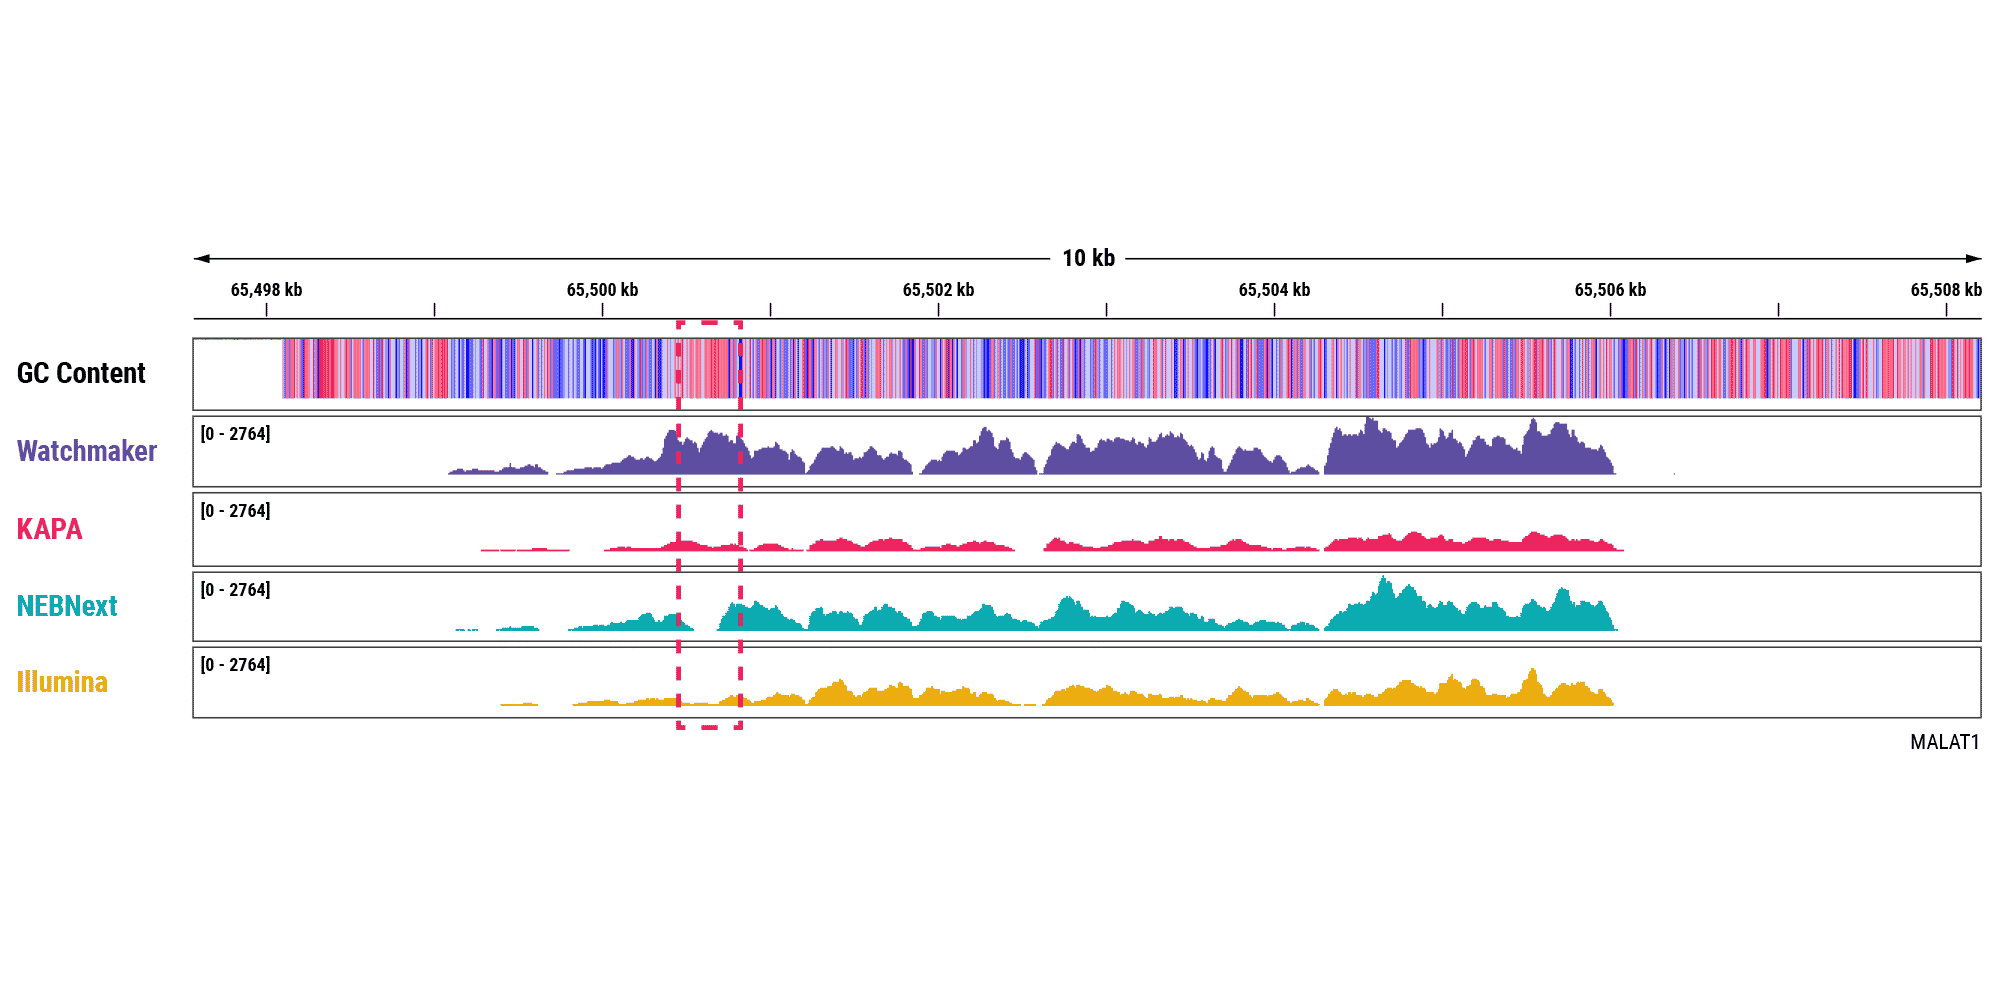 Figure 5B. Improve efficiency and characterize lncRNAs. The Watchmaker solution also provides improved coverage across MALAT1, especially the GC-rich region outlined in red. Libraries were prepared with 10 ng of intact whole blood-derived RNA.